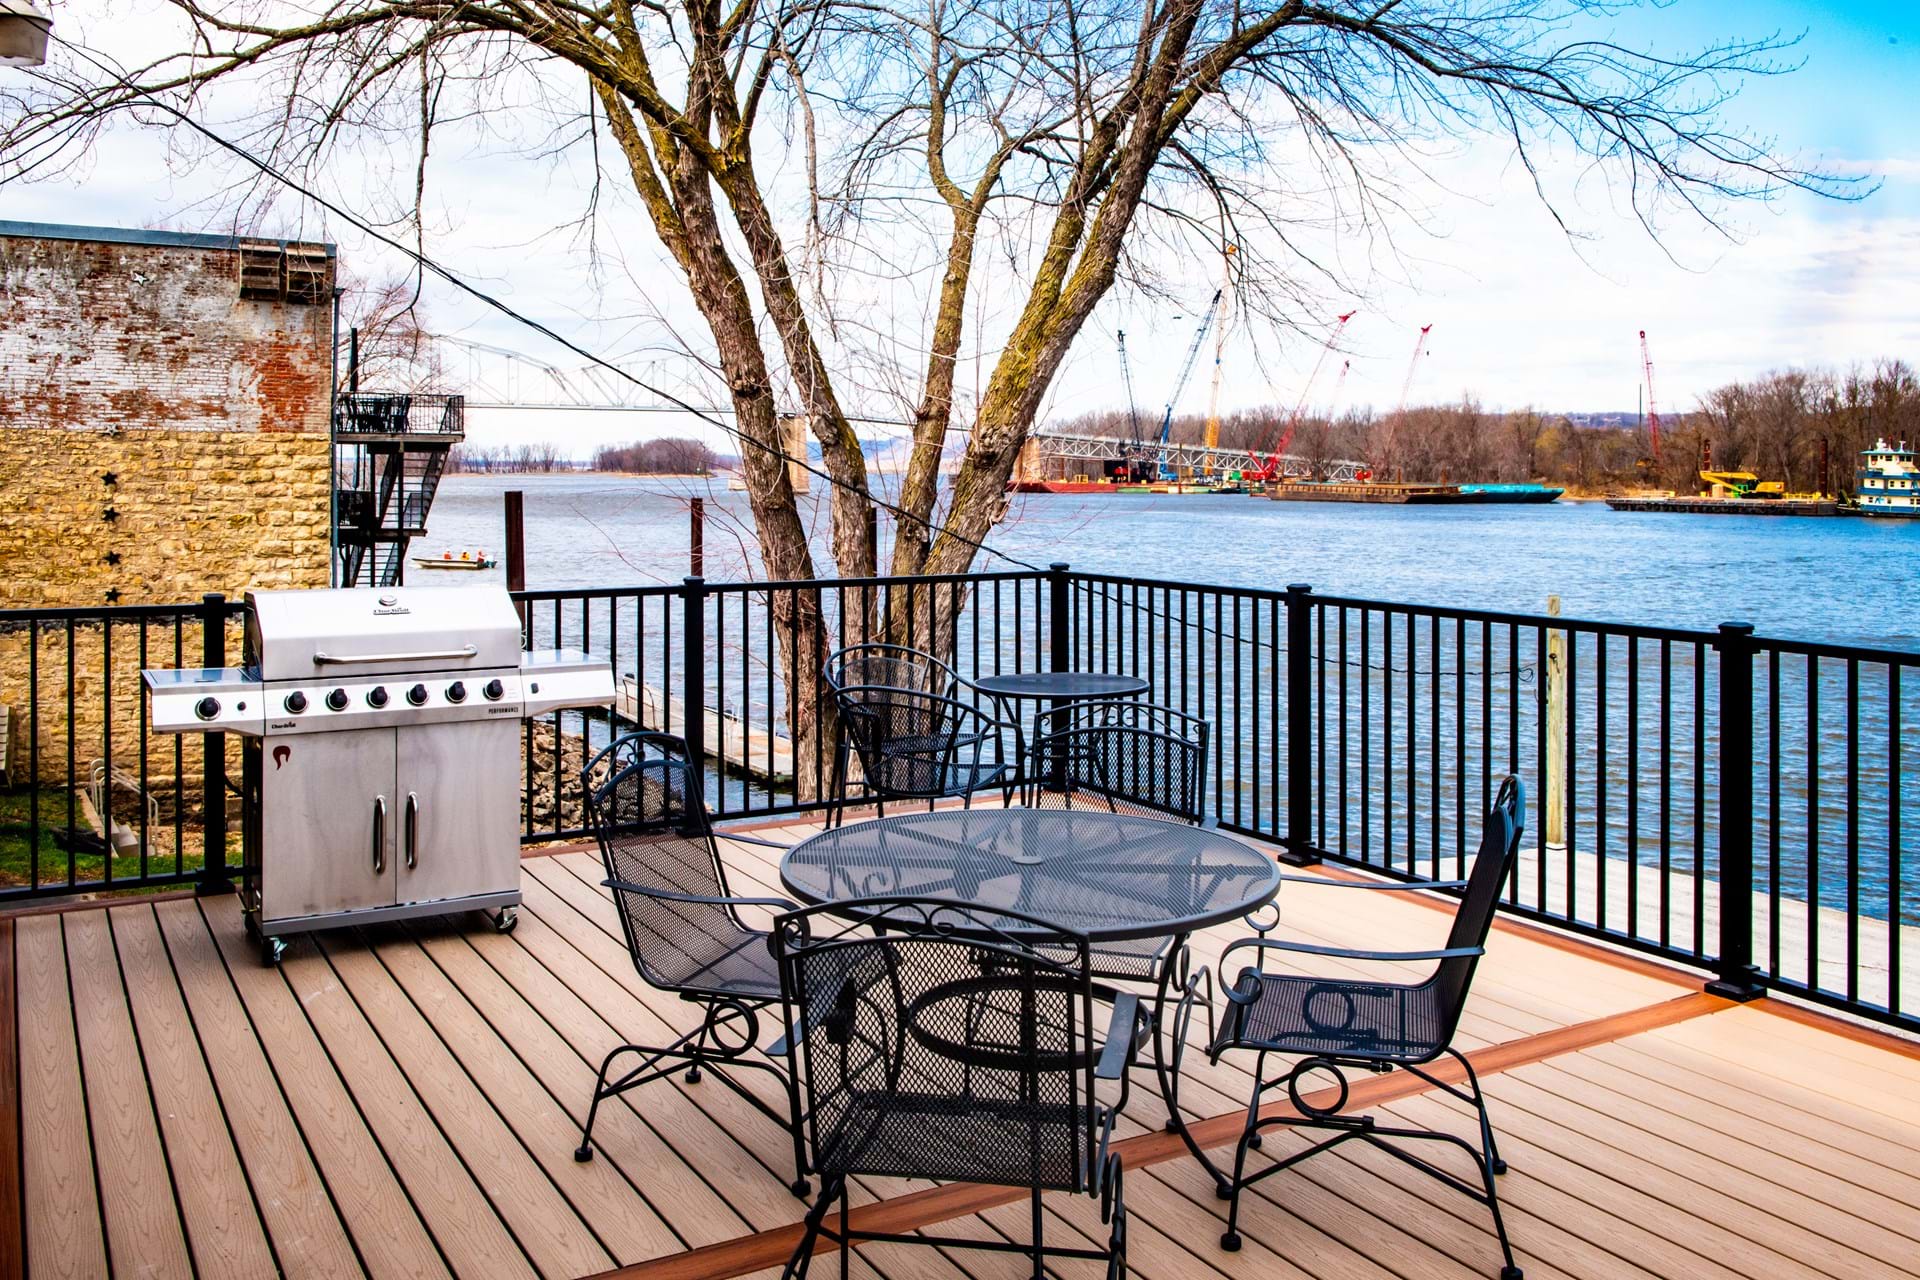 Deck overlooking the Mississippi River